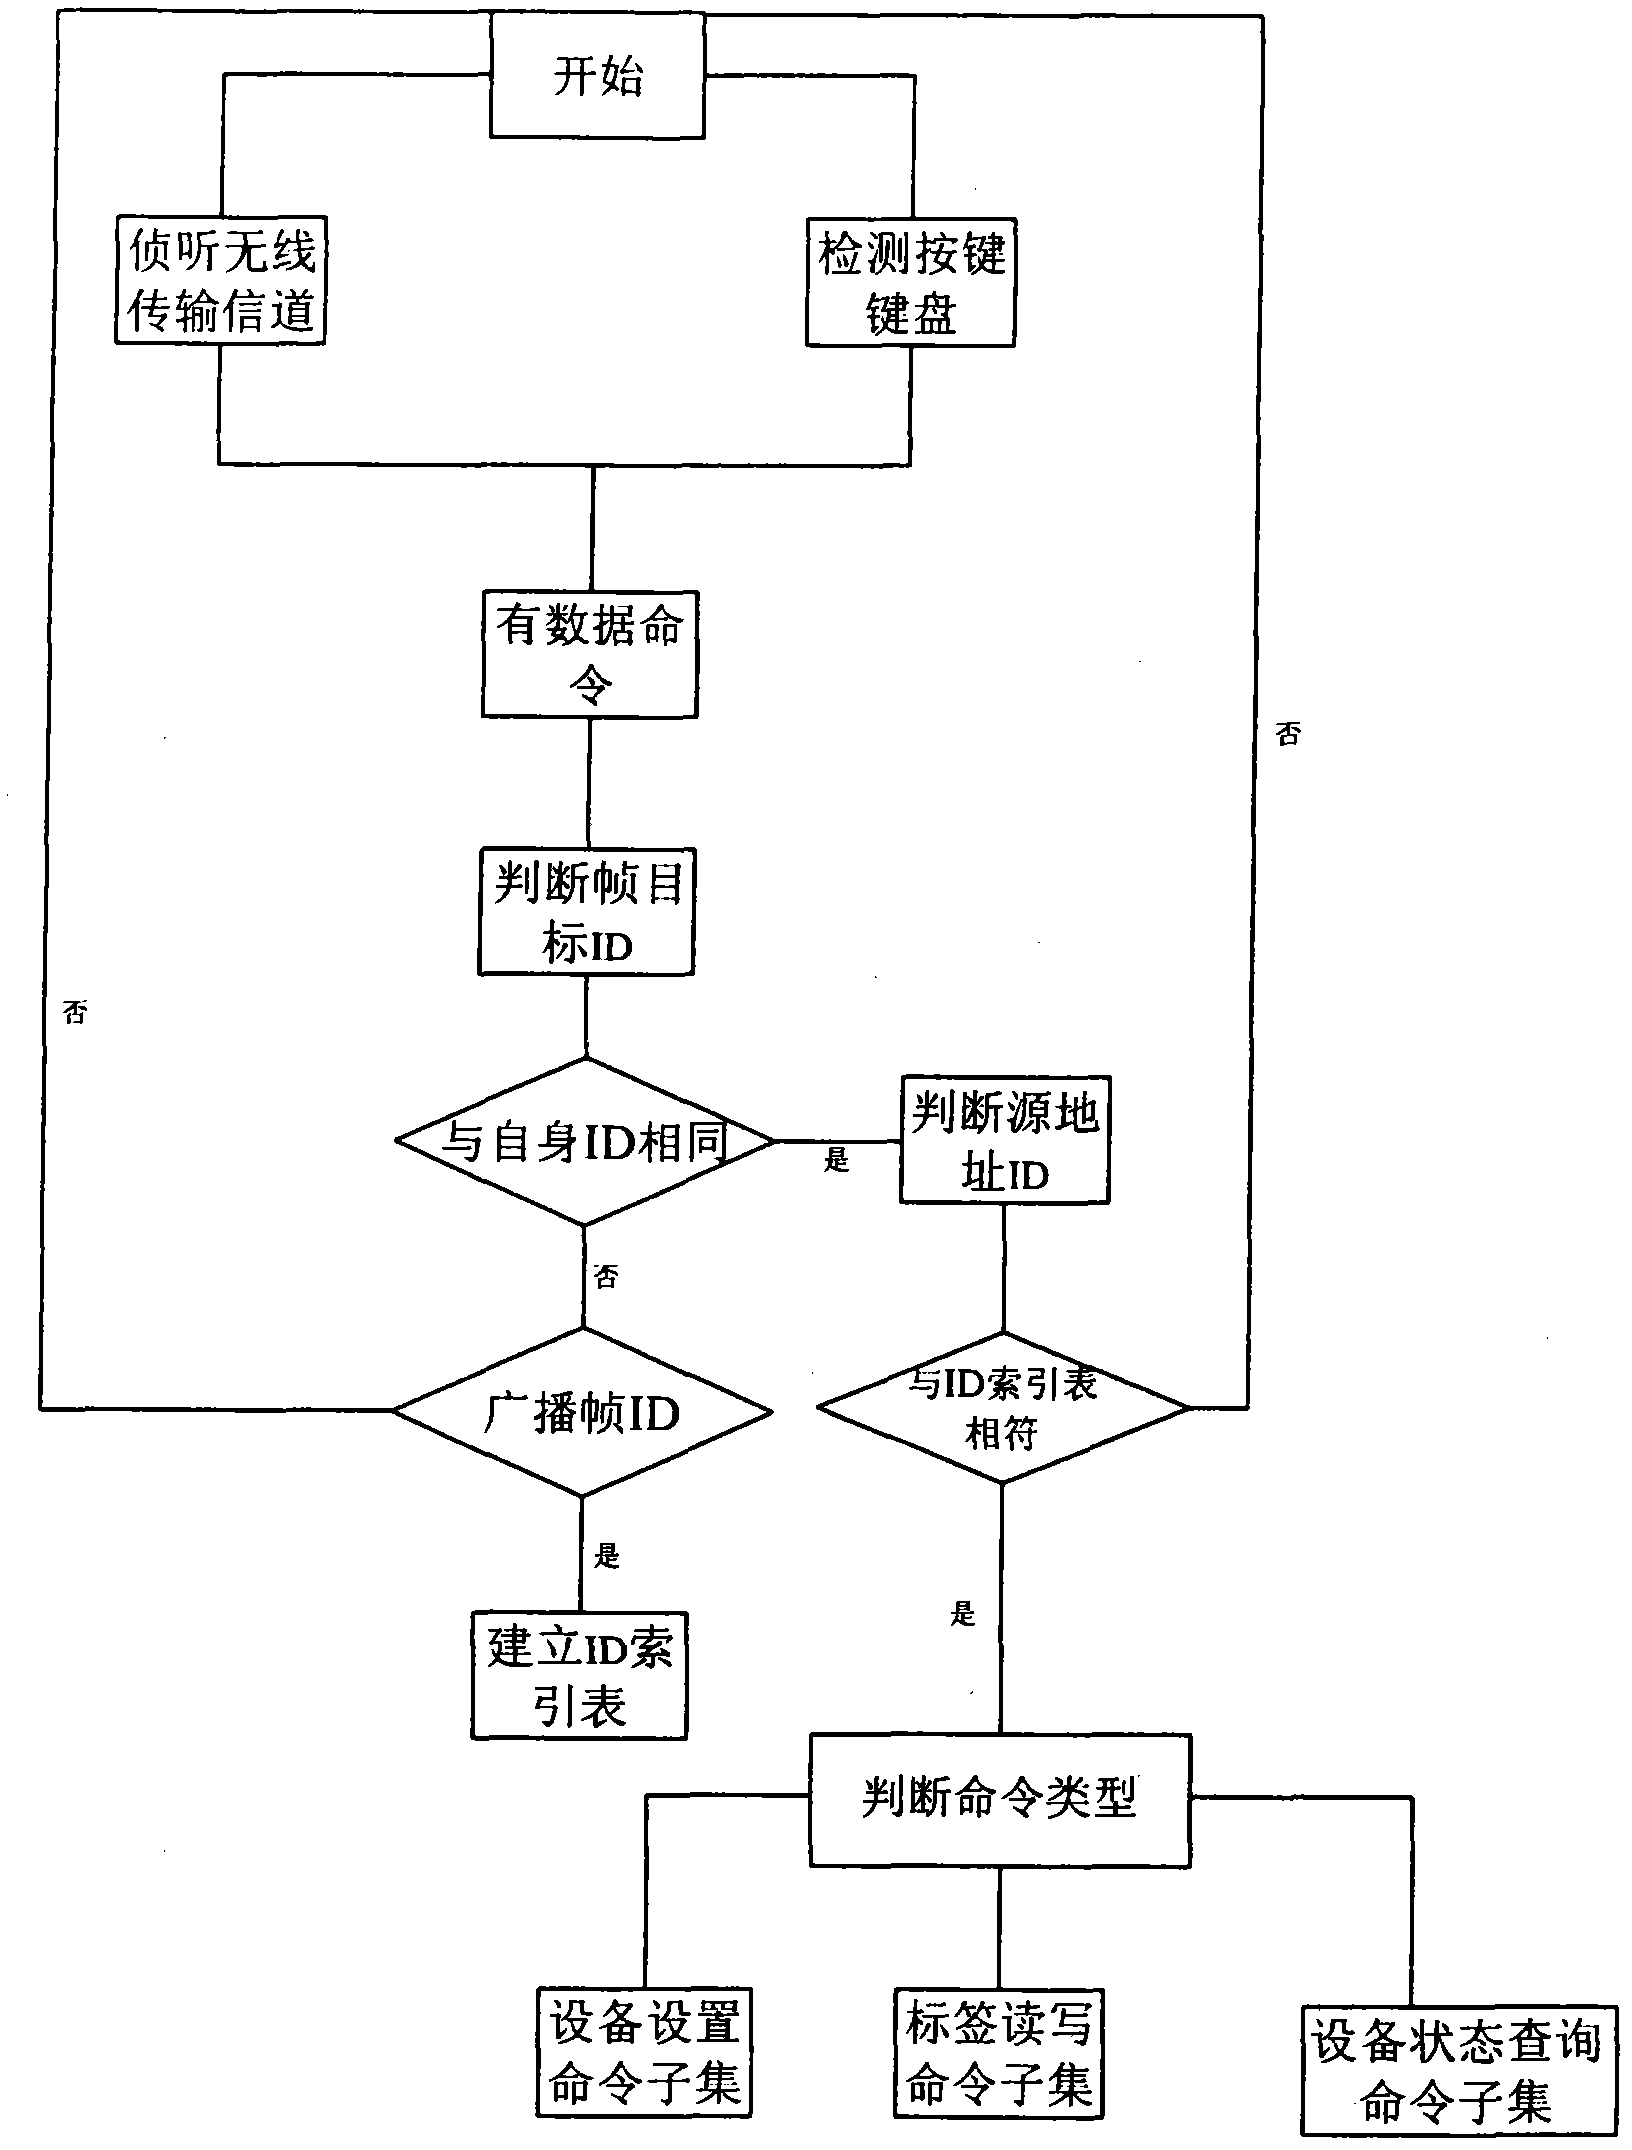 Near field communication method of non-contact radio frequency identification devices